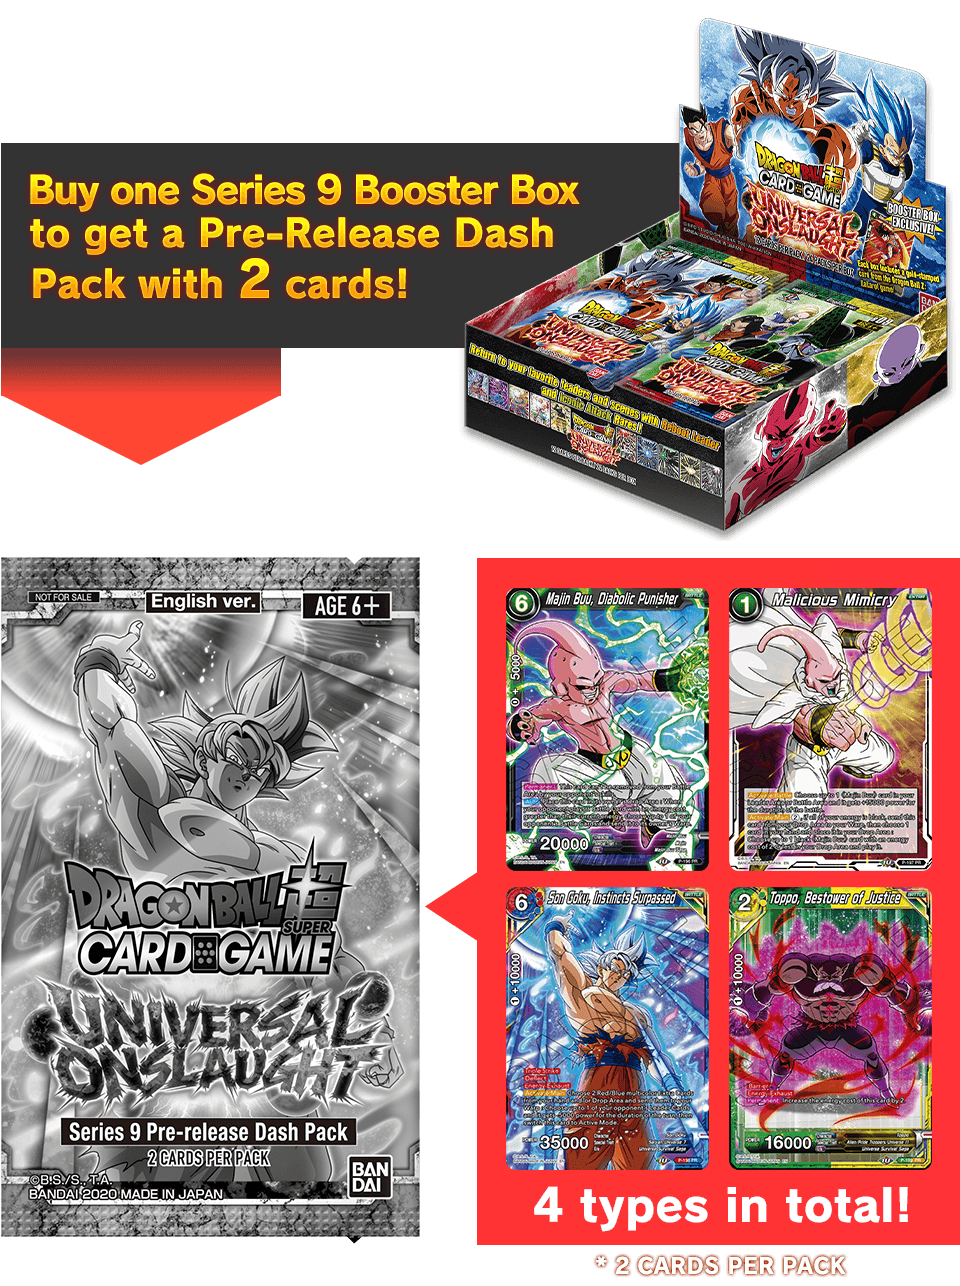 Buy one Series 9 Booster Box to get a Pre-Release Dash Pack with 2 cards!